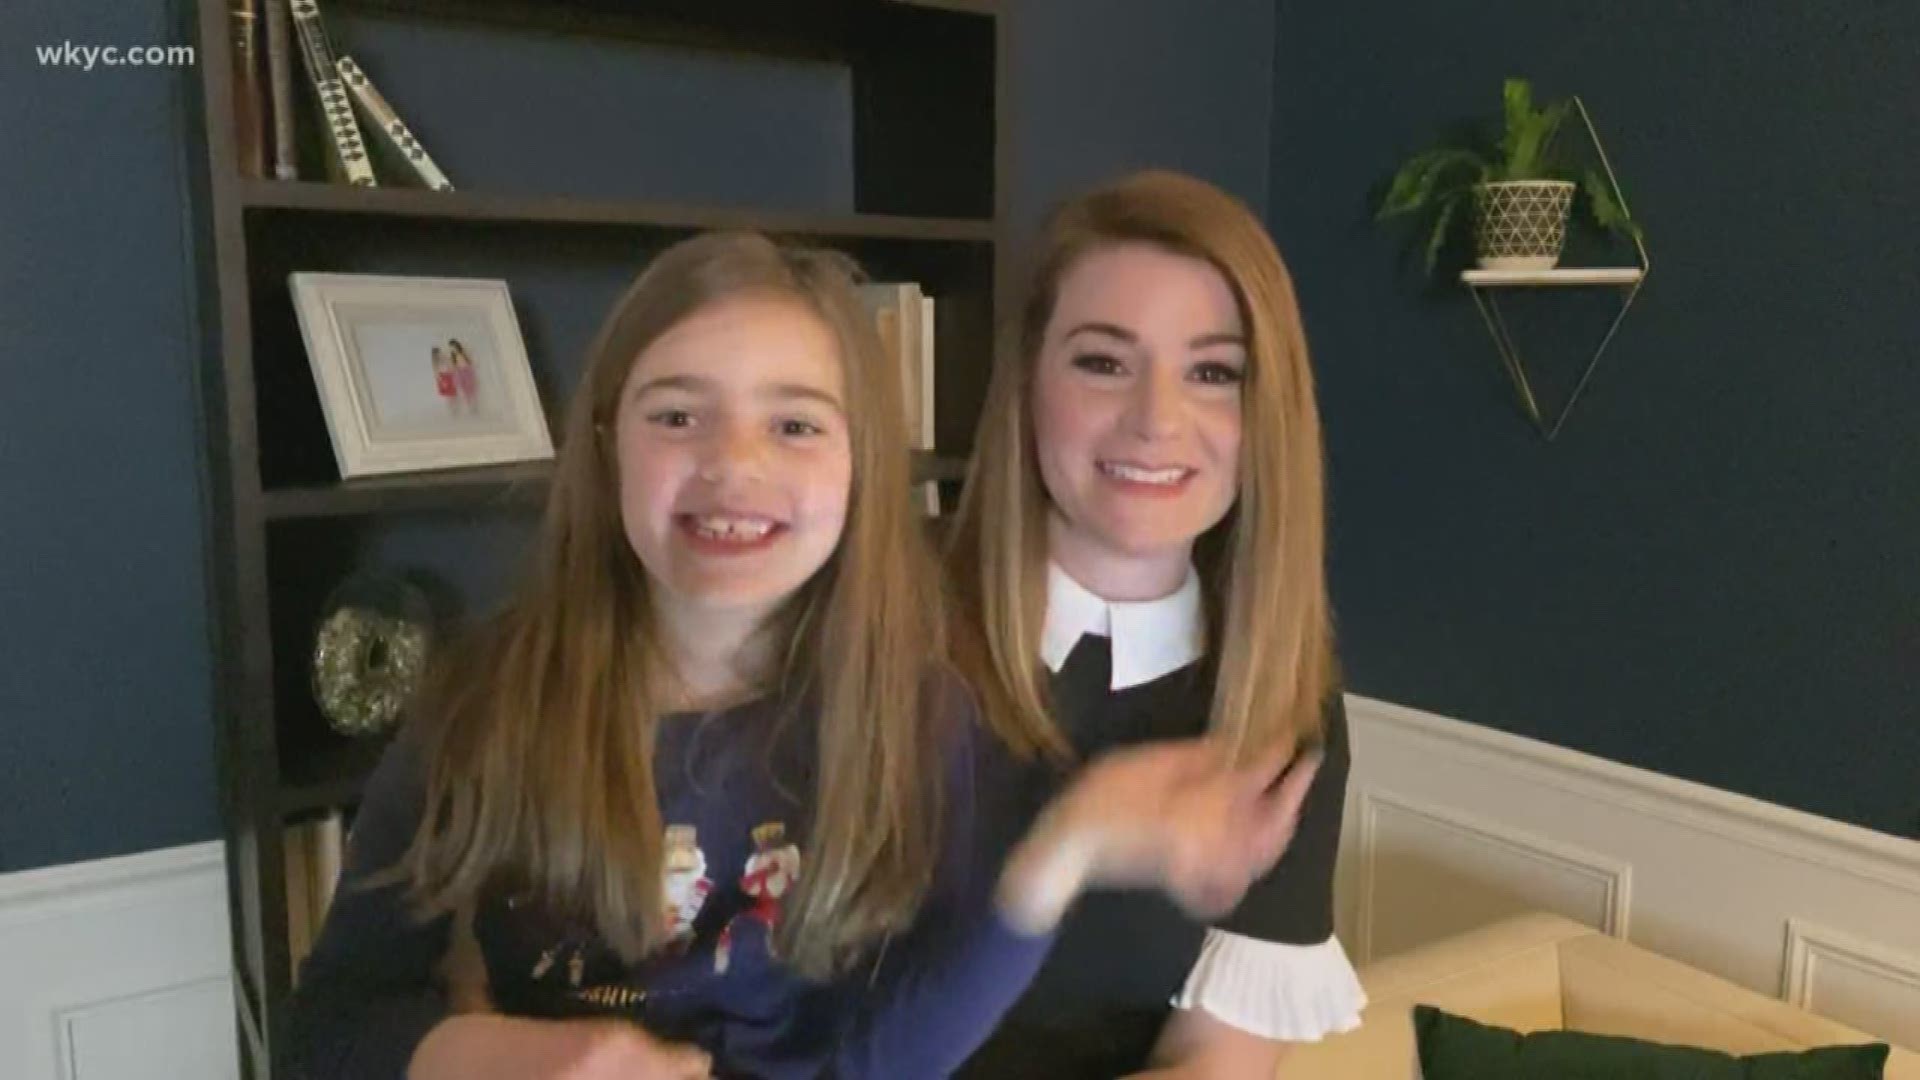 3News anchor Maureen Kyle shared a family moment on air today as her daughter made a surprise appearance.